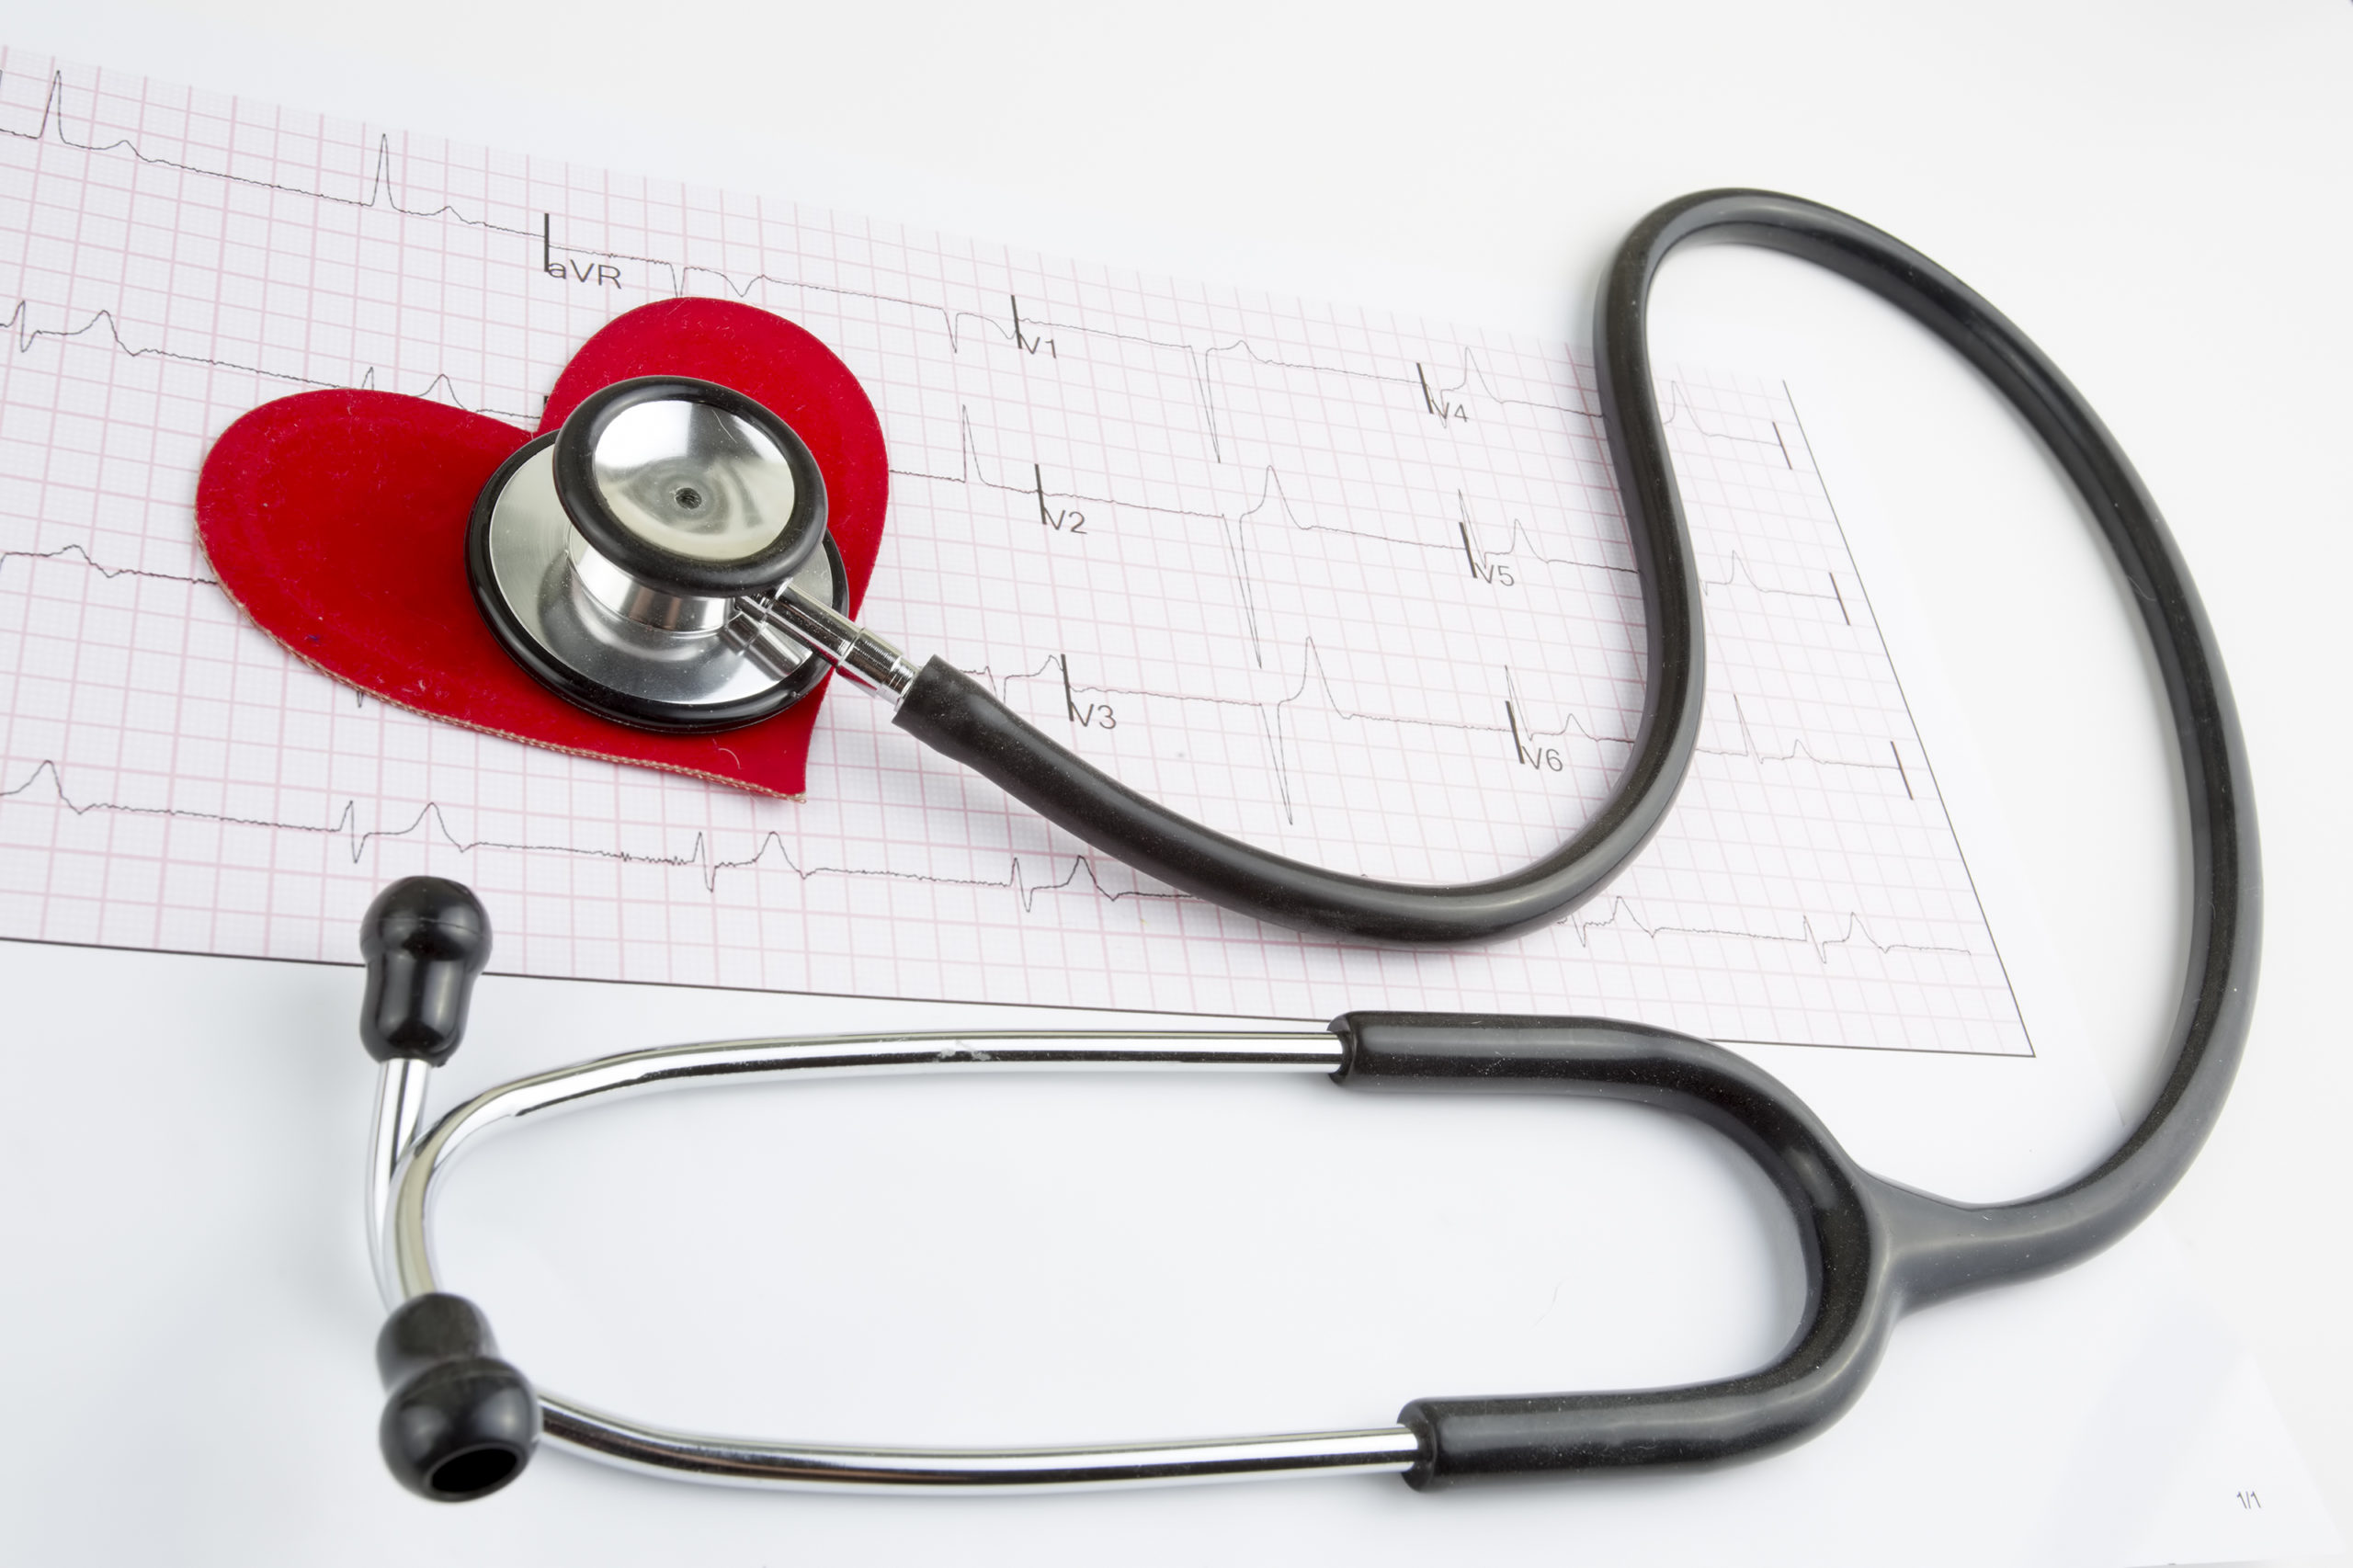 A stethoscope over a paper heart and EKG printout